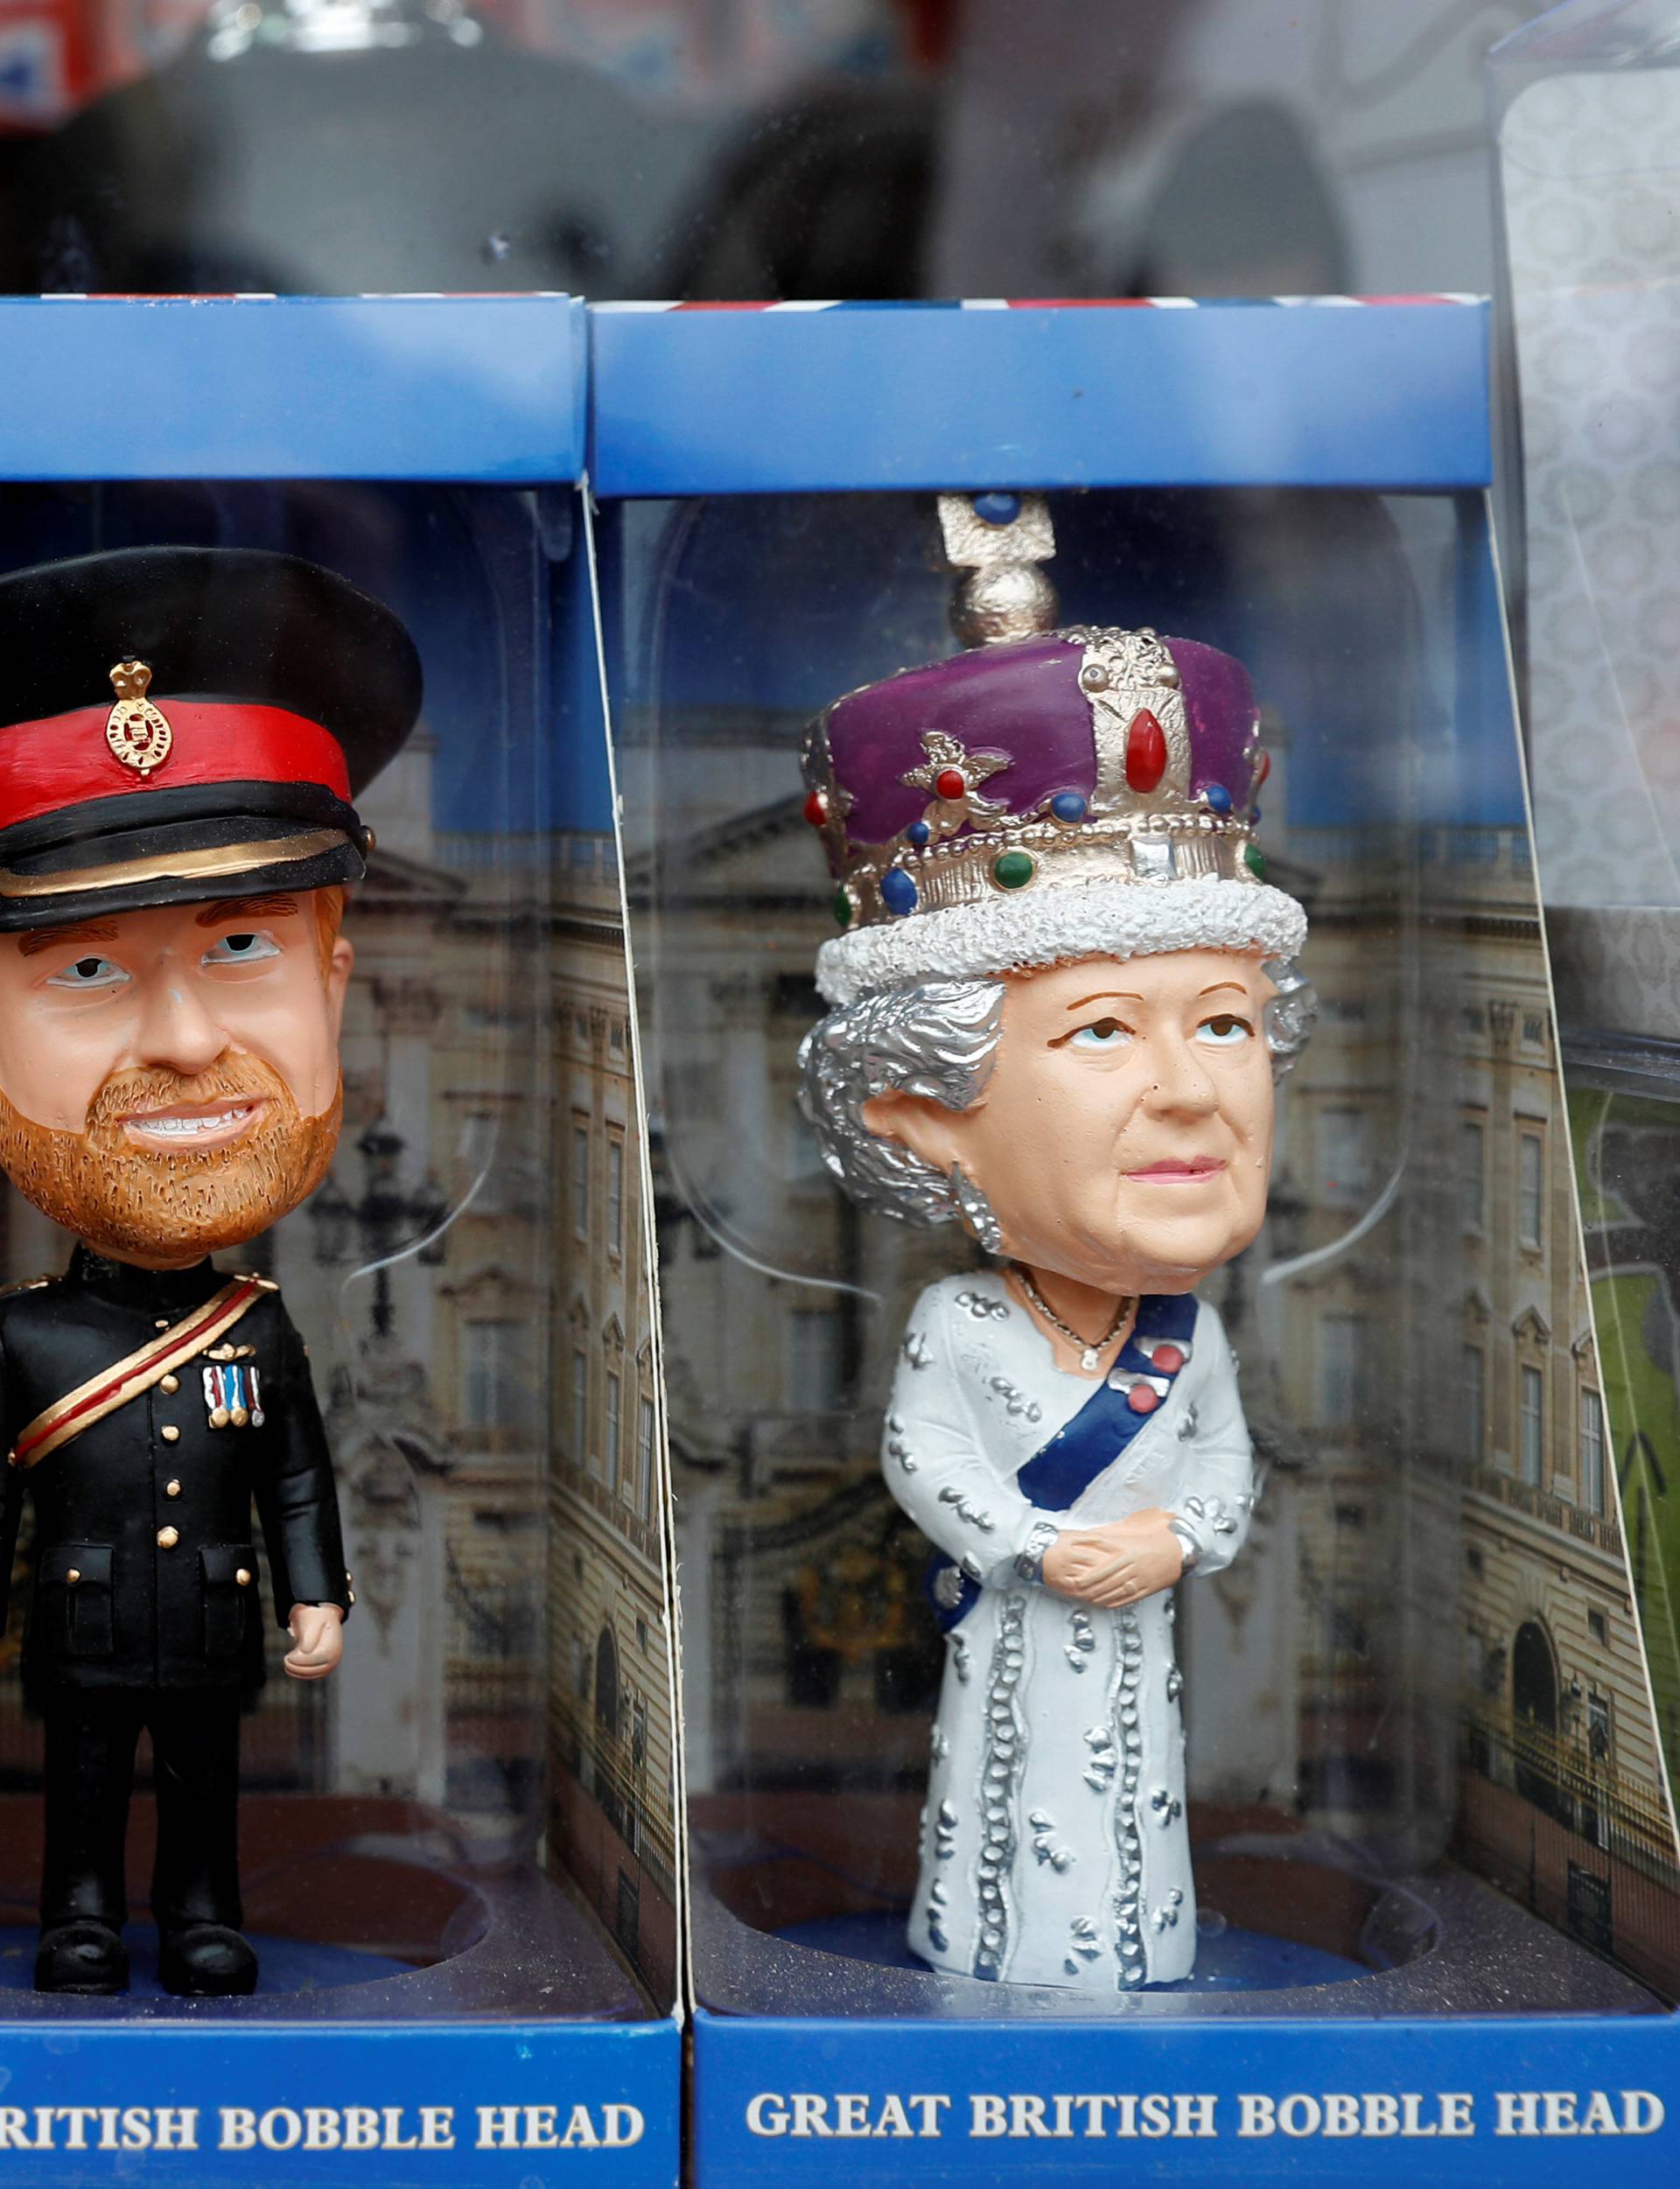 Royal wedding memorabilia is seen on sale in a shop window prior to the wedding of Prince Harry and Meghan Markle in Windsor